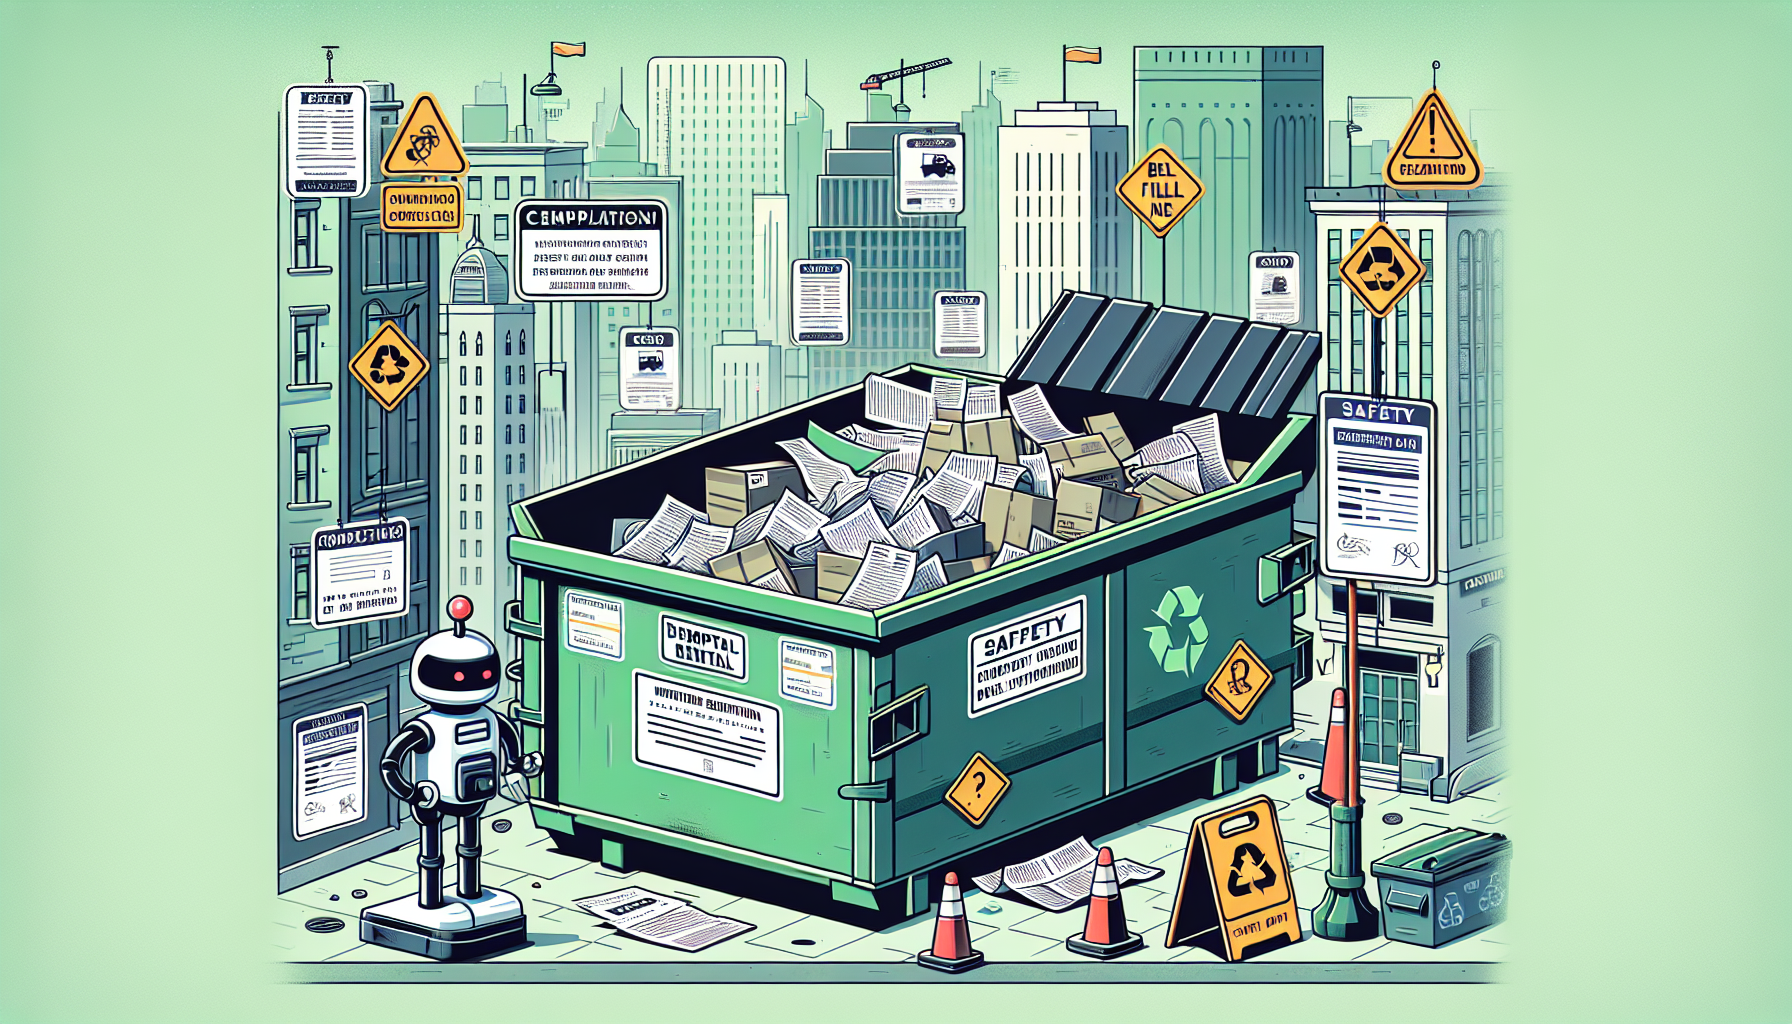 Illustration of dumpster rental regulations and permits in New York